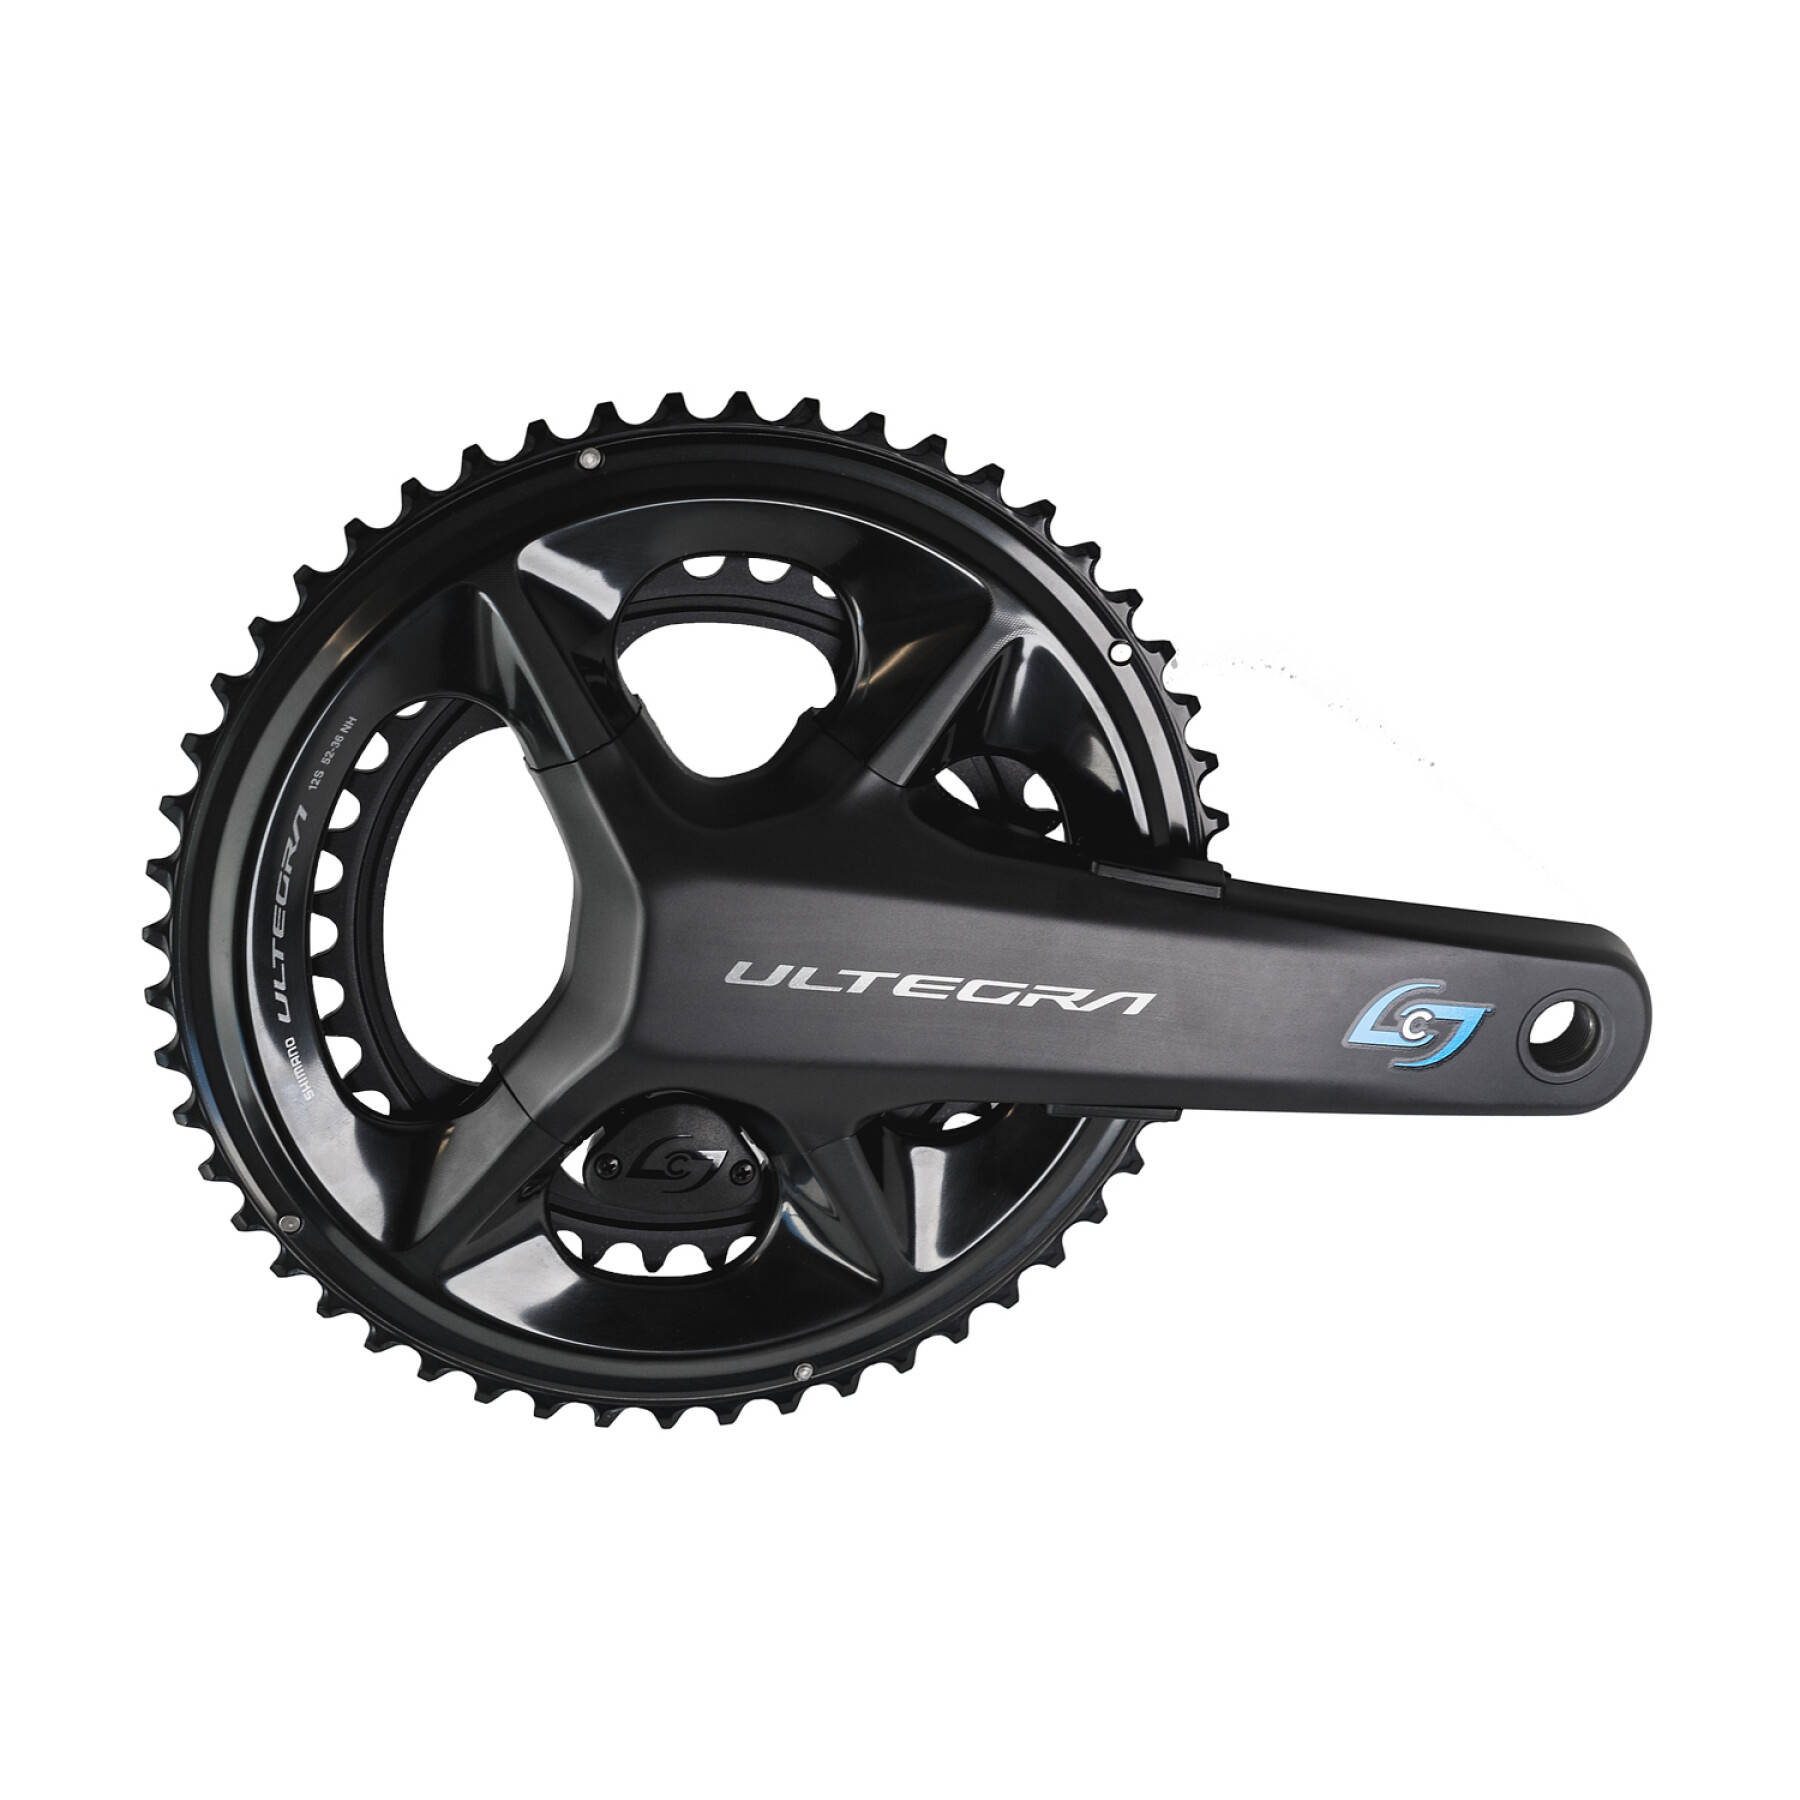 Cranks Stages Cycling Stages Power R - Shimano Ultegra R8000